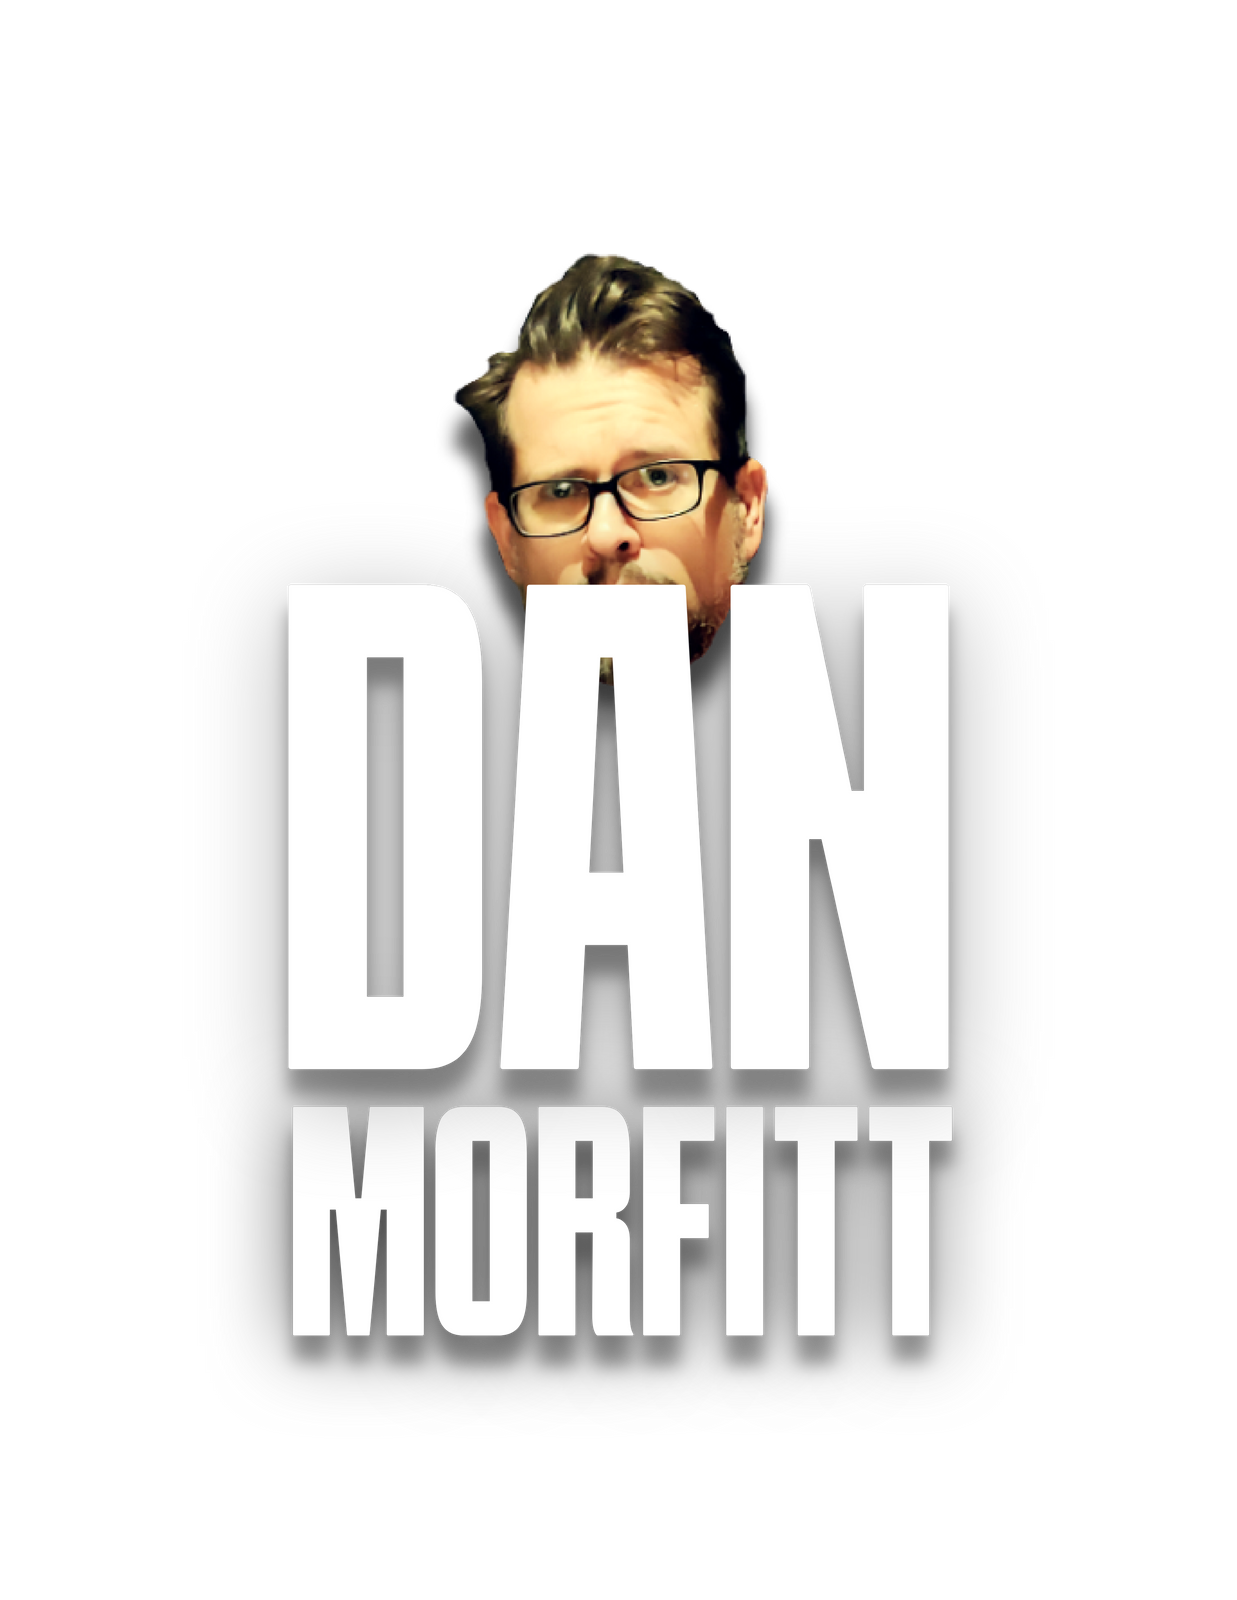 This is Dan Morfitt's huge watermark icon he puts on many things. You're not missing anything. If you are acutely visually impared, Dan is six foot six, olive skinned and just sexy. He exudes sexiness. 